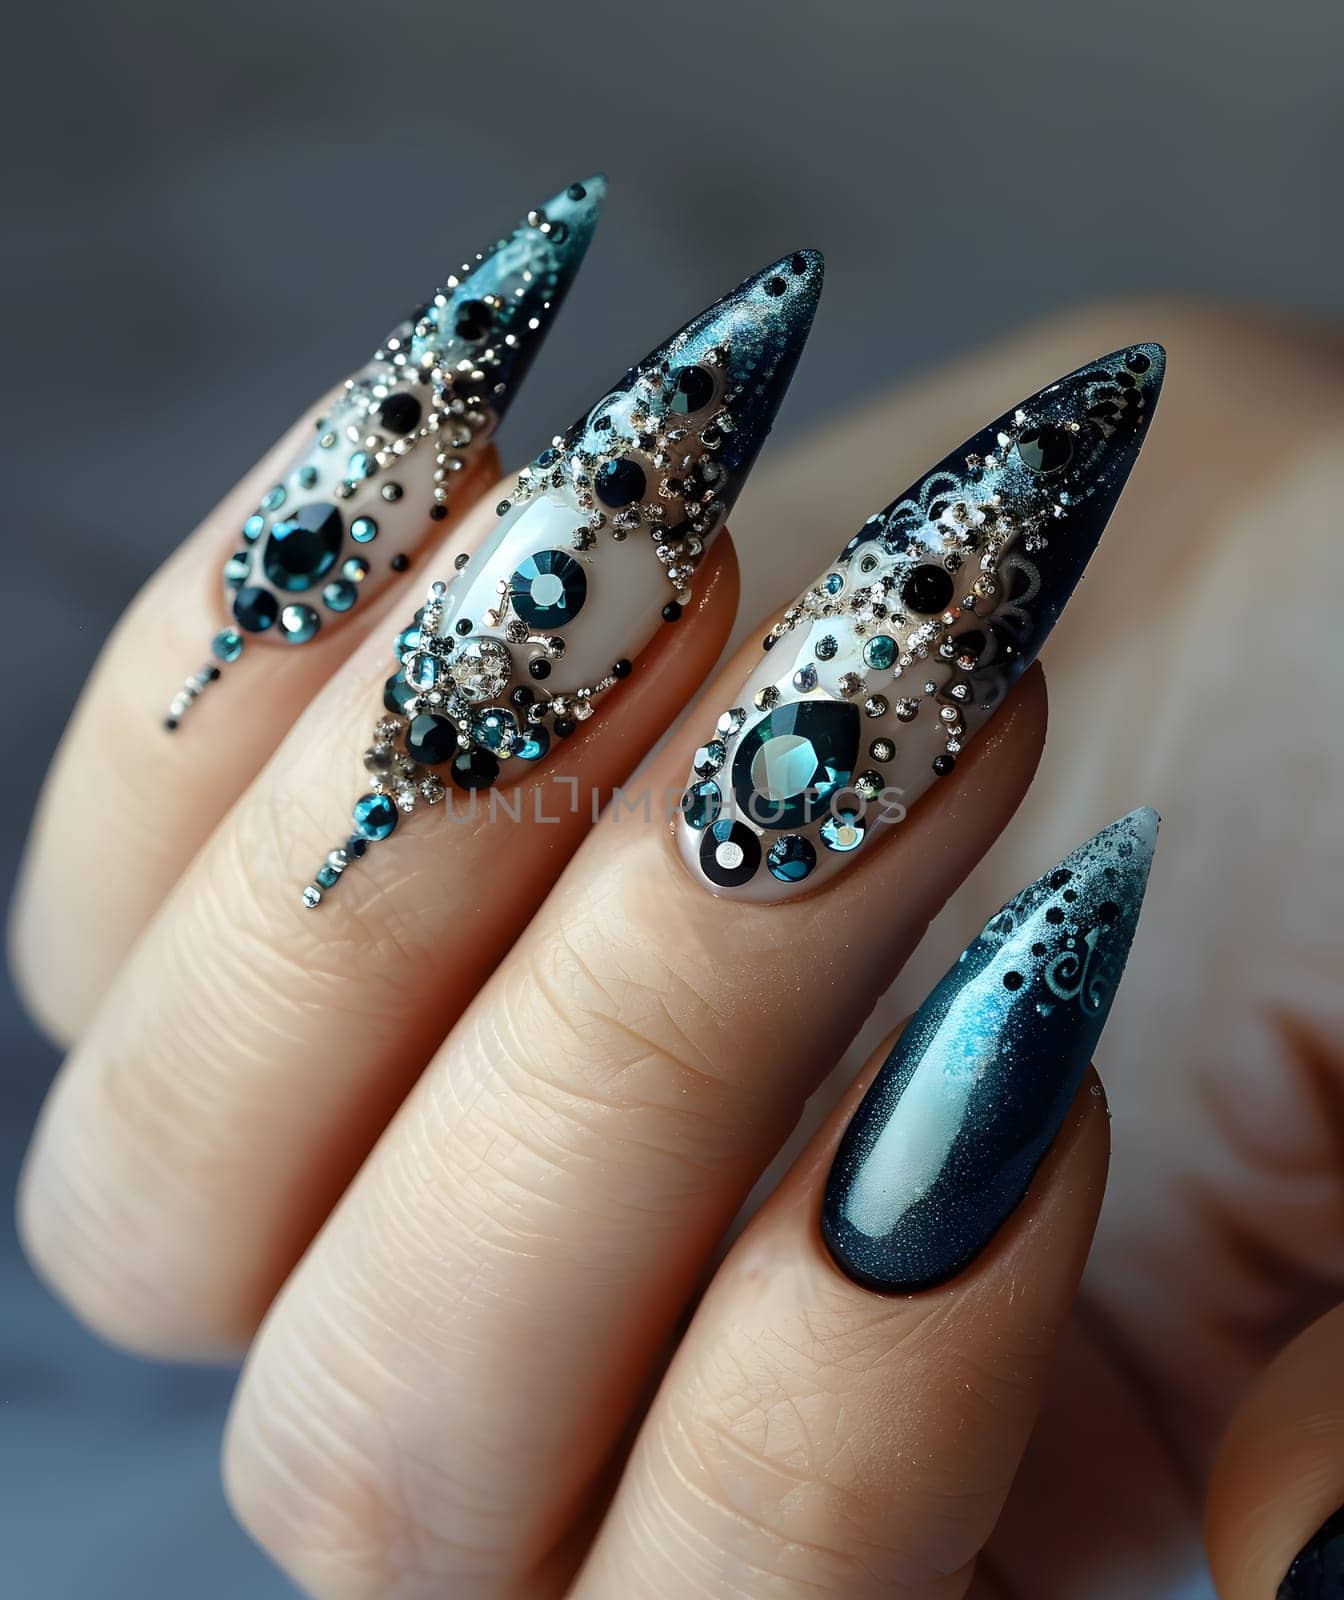 A closeup of a womans hand featuring long nails adorned with rhinestones. The nails are painted with liquid nail polish, enhancing their natural beauty